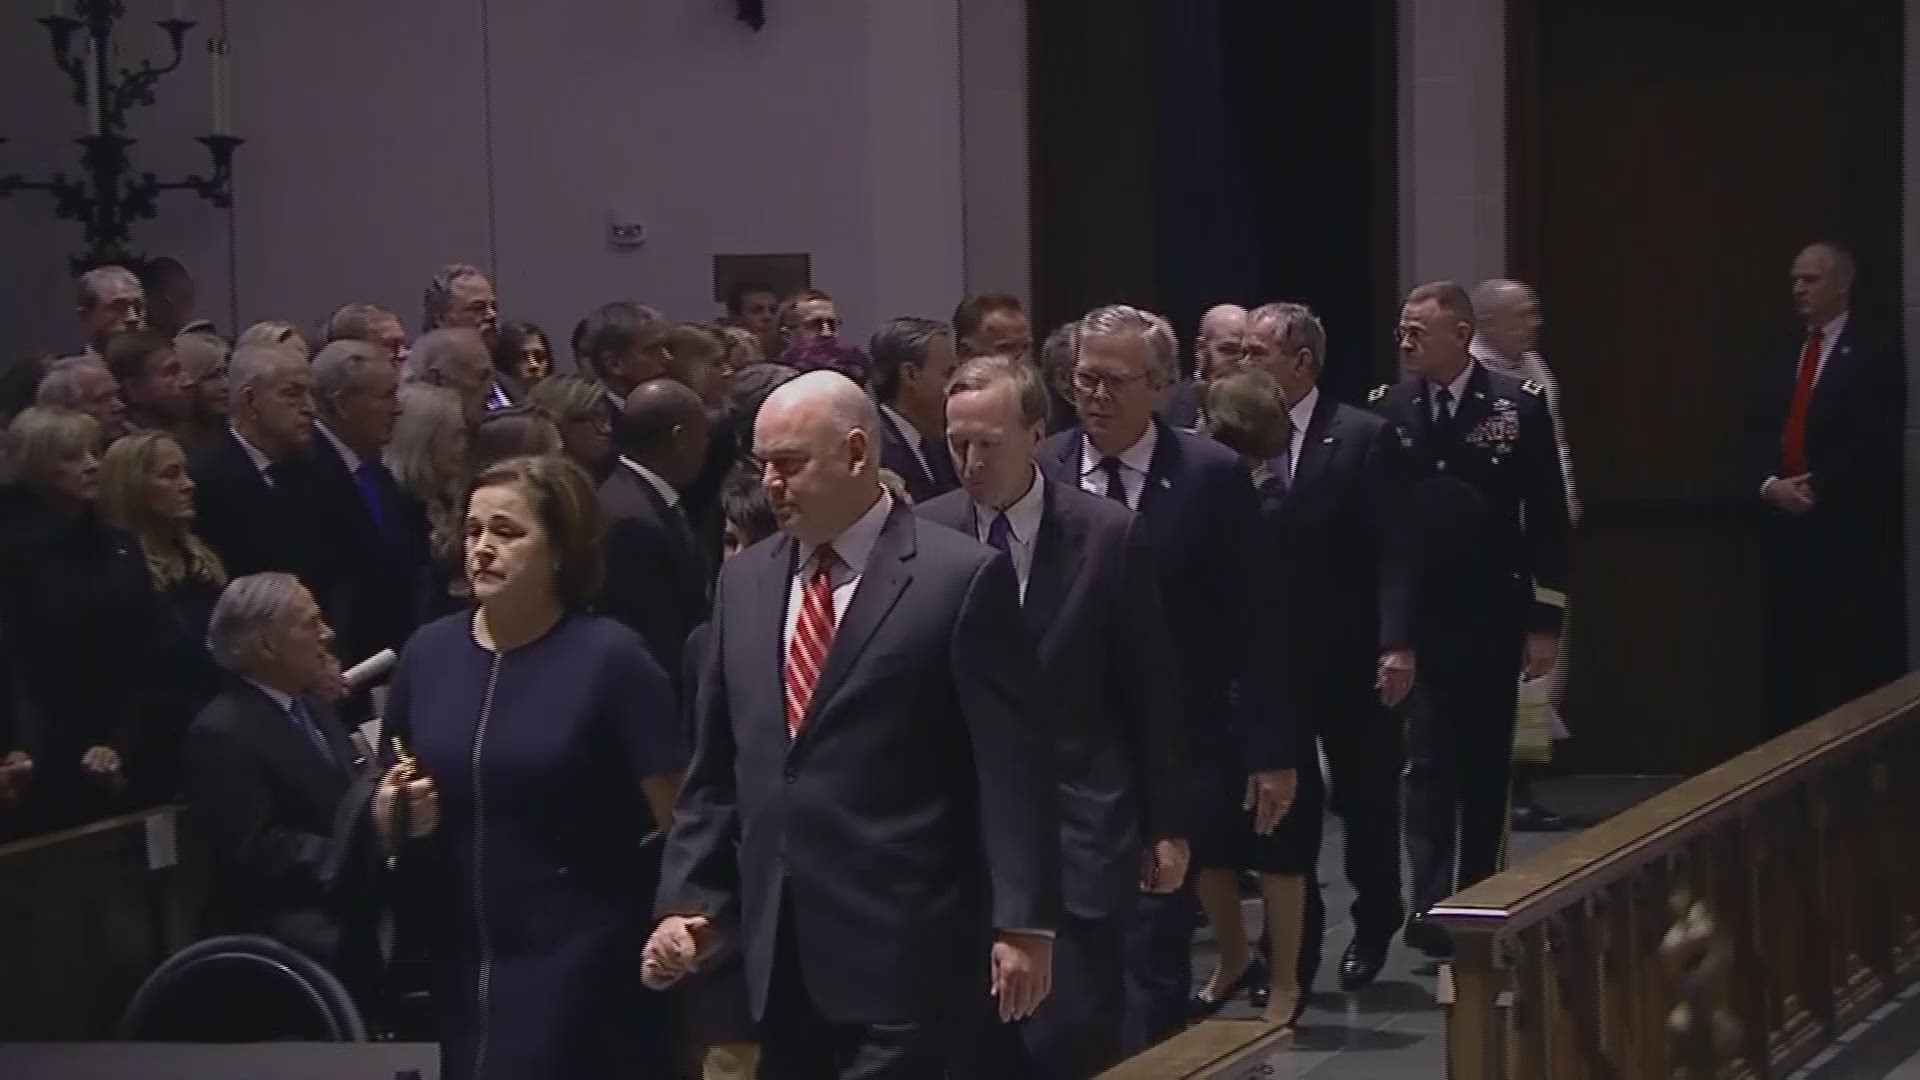 Friends and family shared fond memories of President George H.W. Bush during Thursday's funeral service in Houston, Texas.